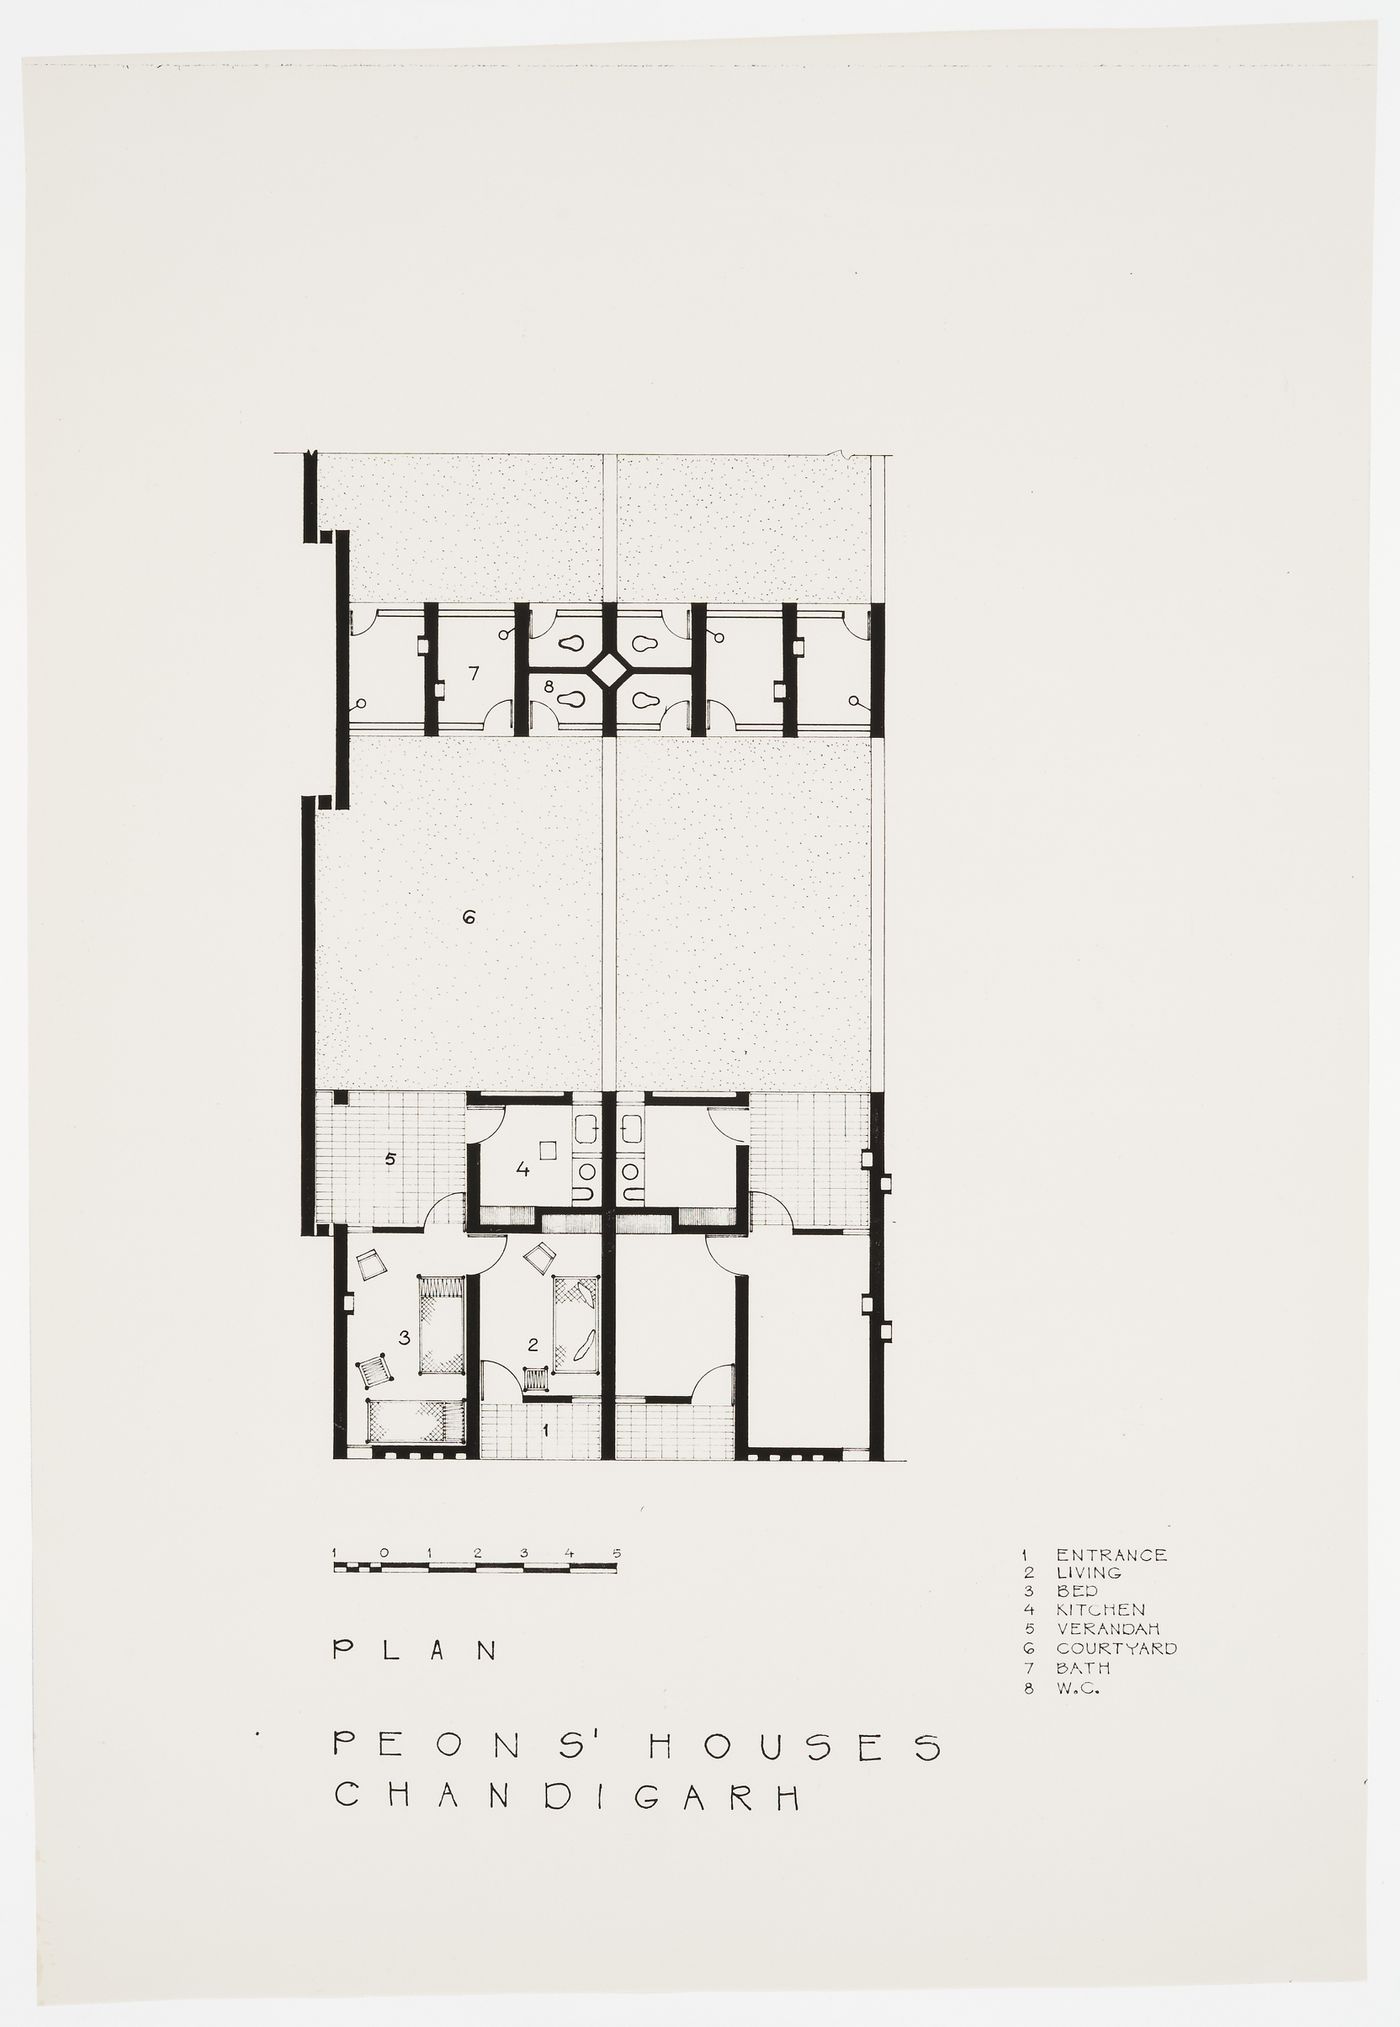 Plan for peons' houses, Chandigarh, India